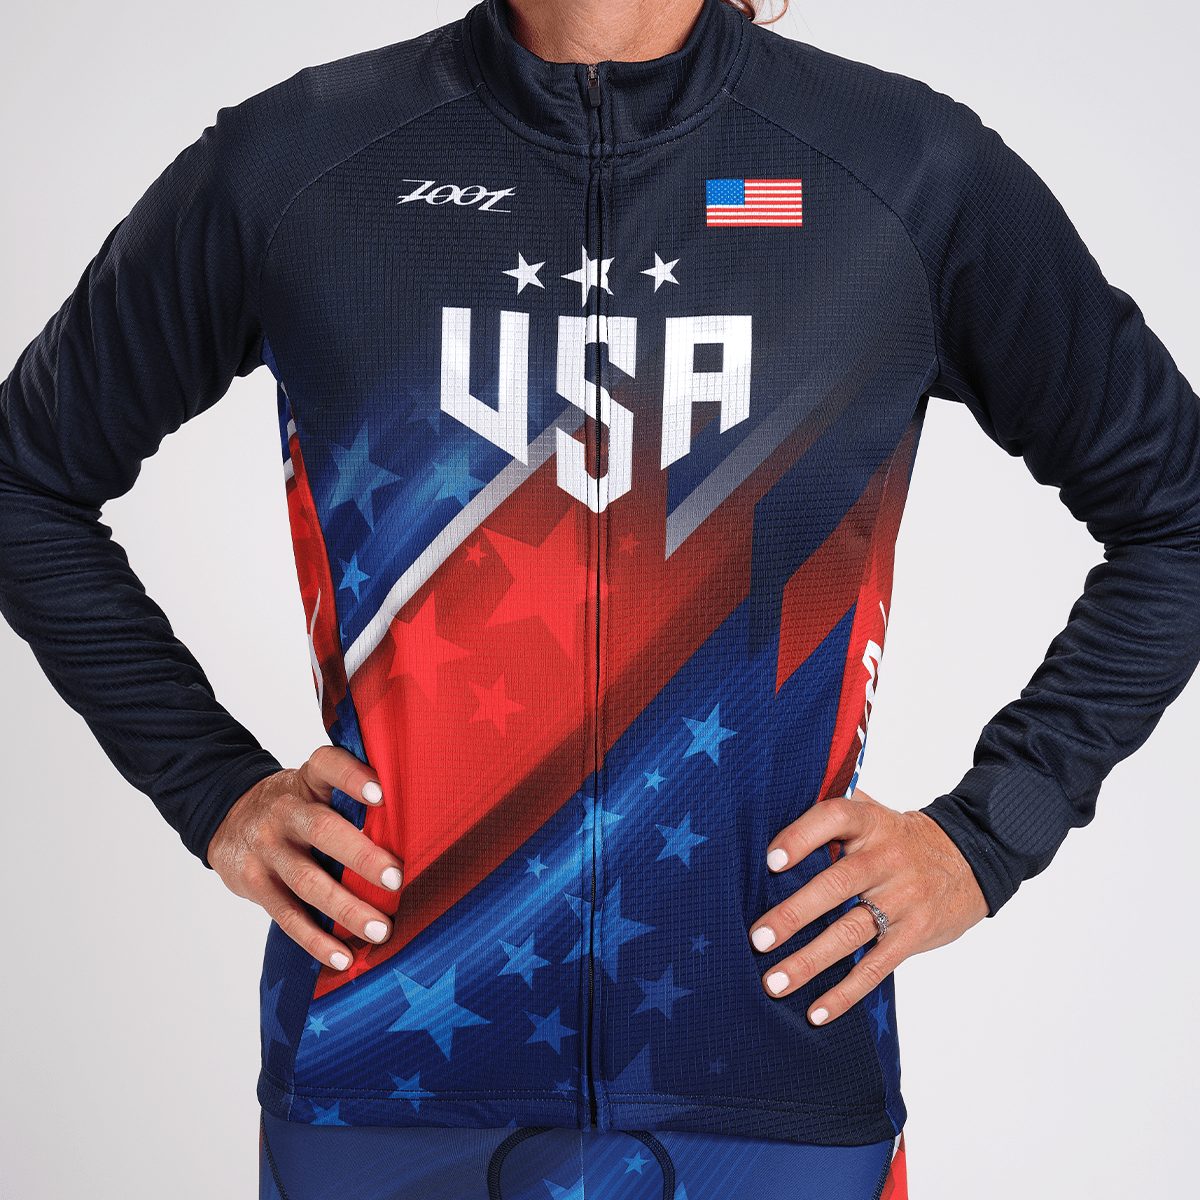 Zoot Sports CYCLE TOPS WOMENS LTD CYCLE THERMO JERSEY - TEAM USA